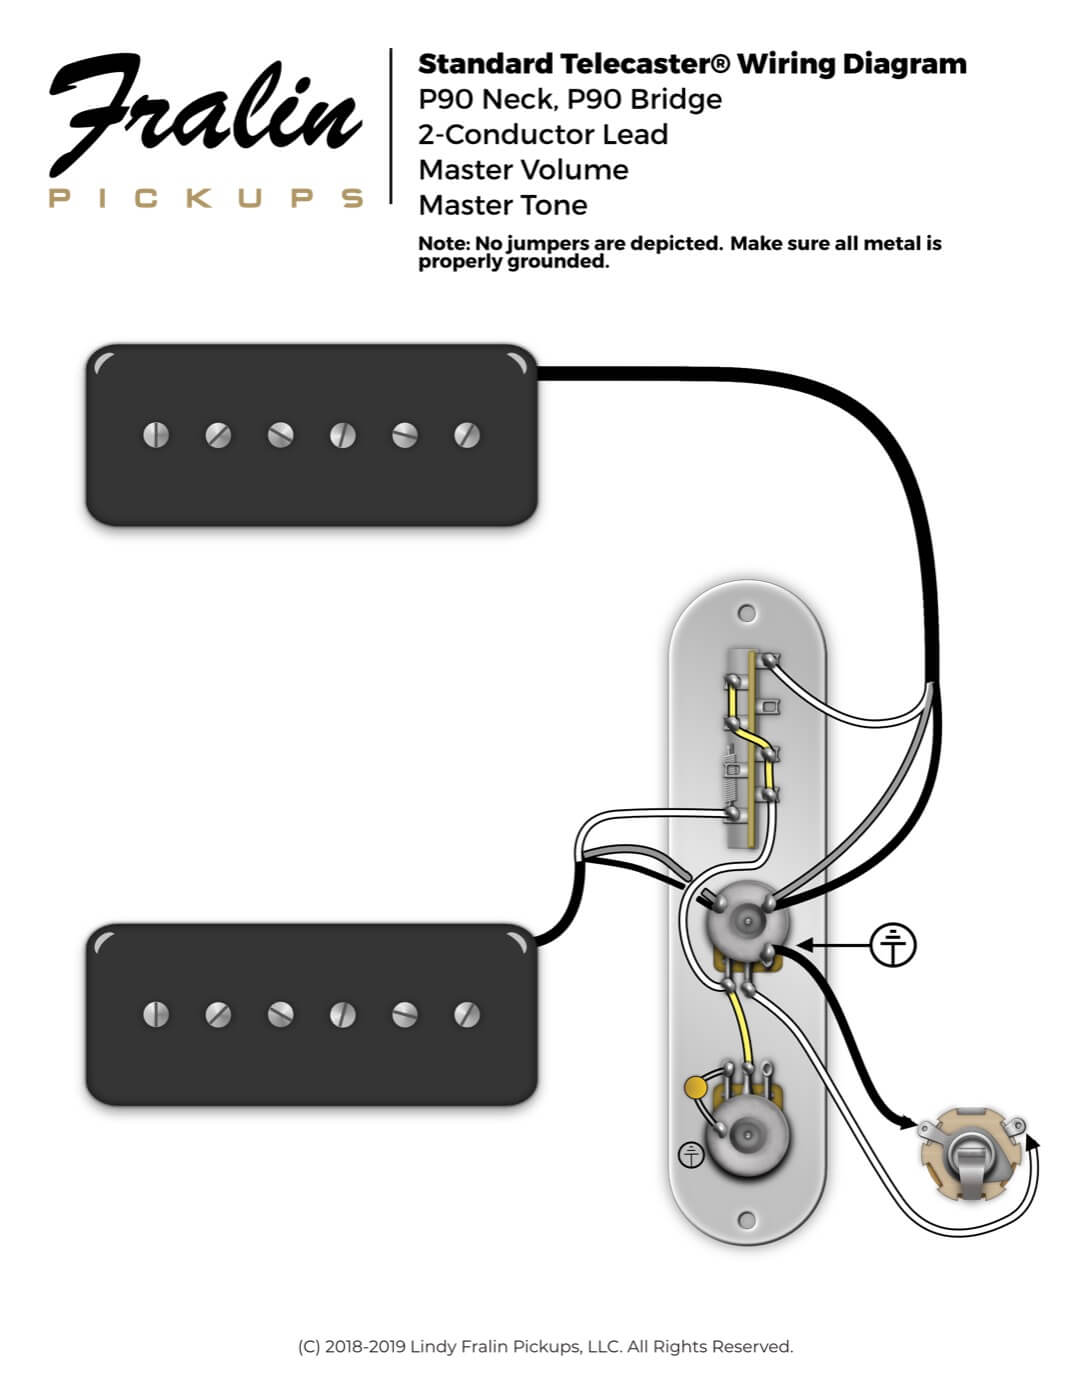 Wiring Diagram For Telecaster With Humbucker Wiring Diagram